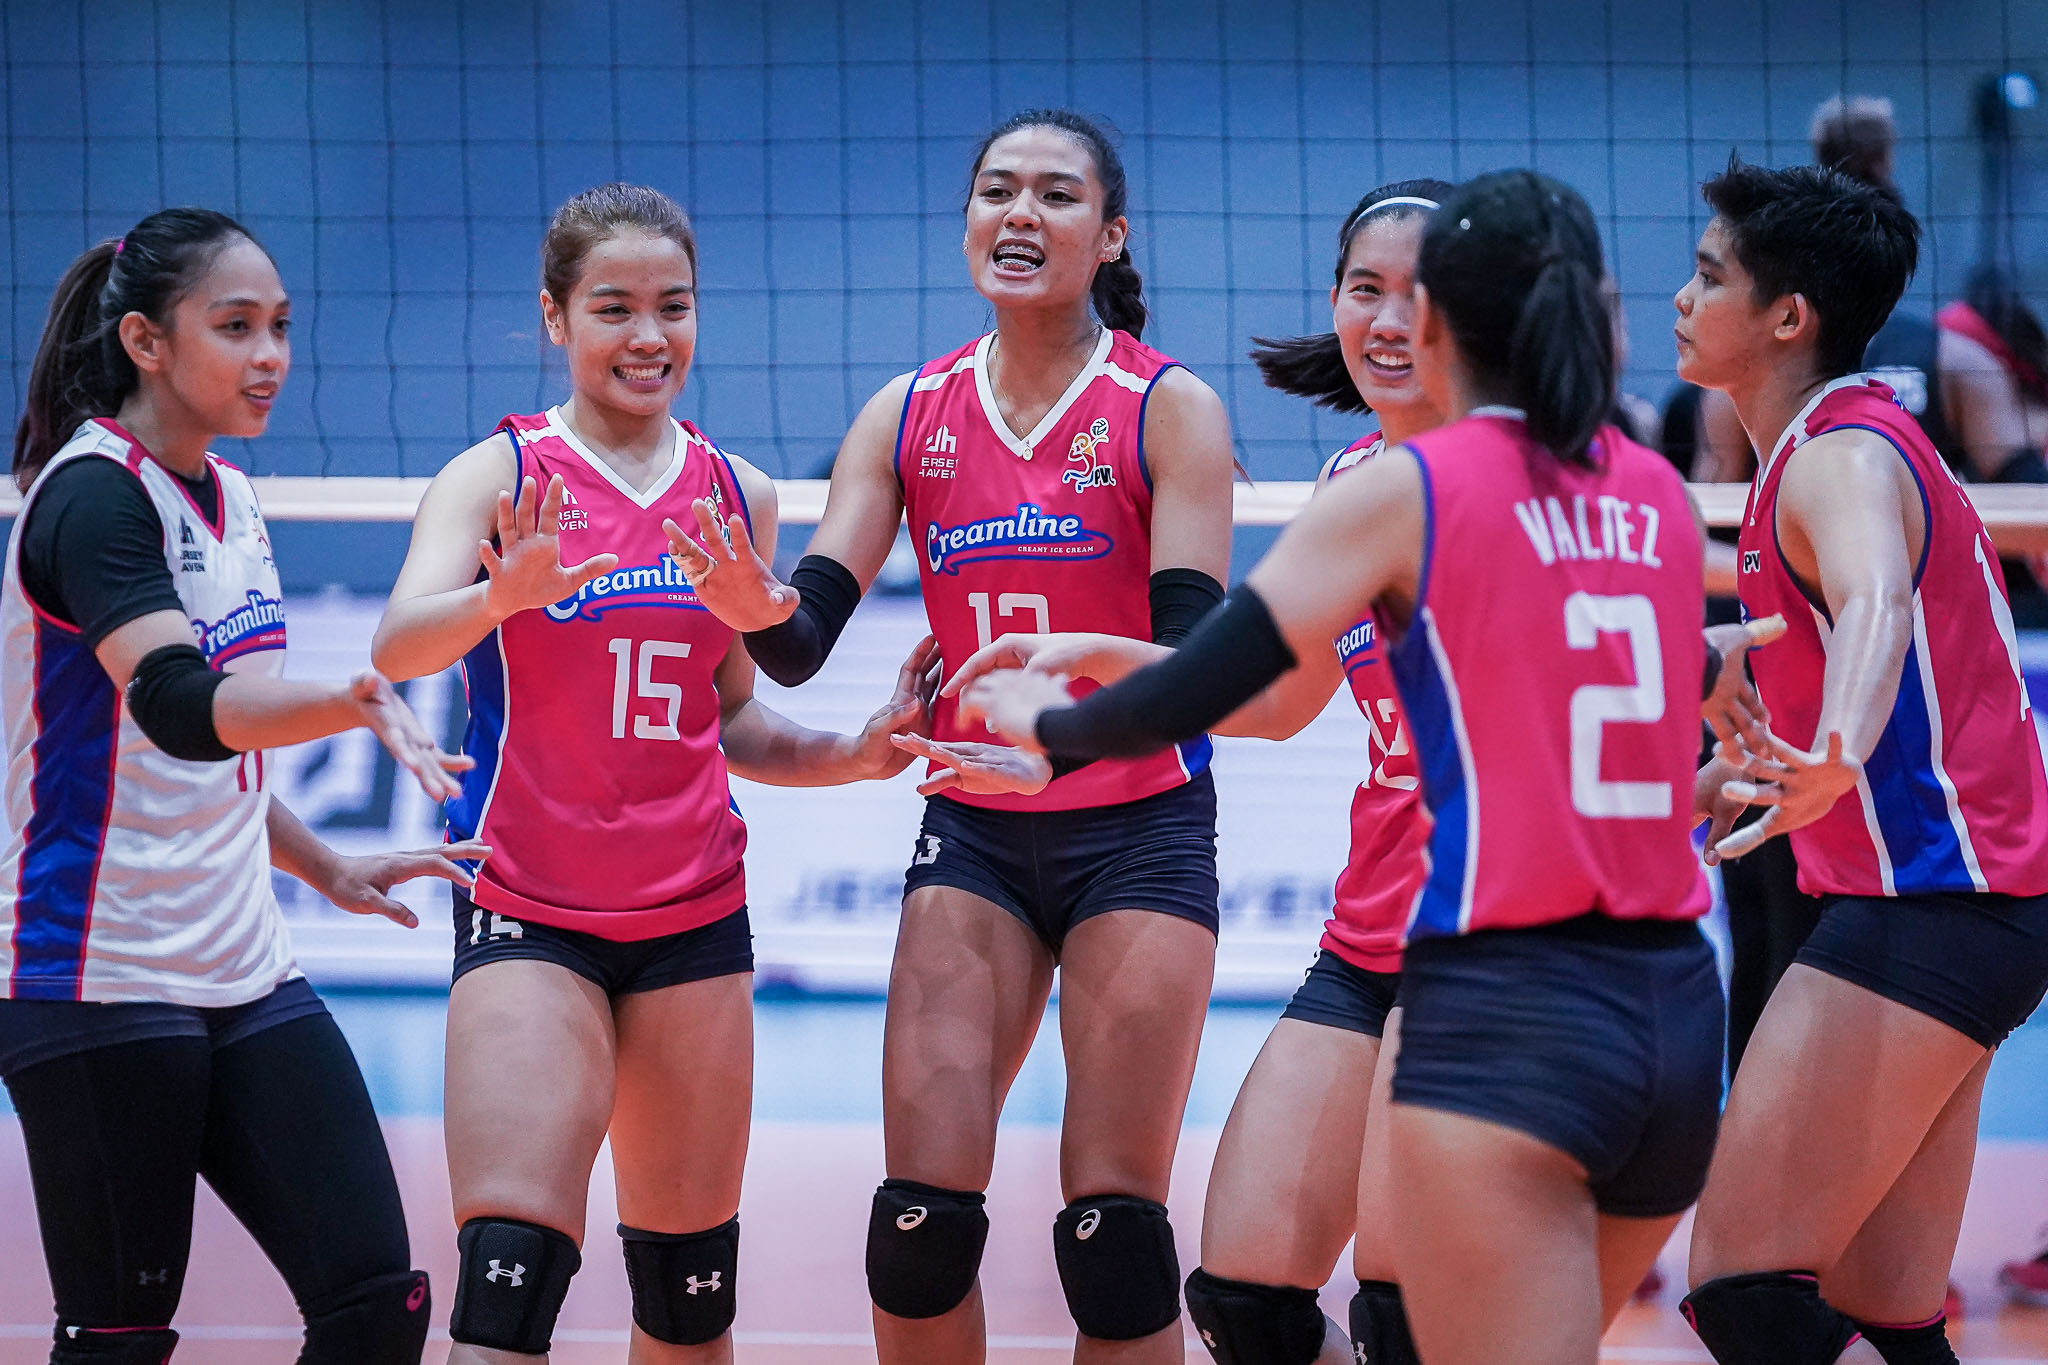 PVL: Chemistry plays big part in Creamline’s early success, says Tots Carlos